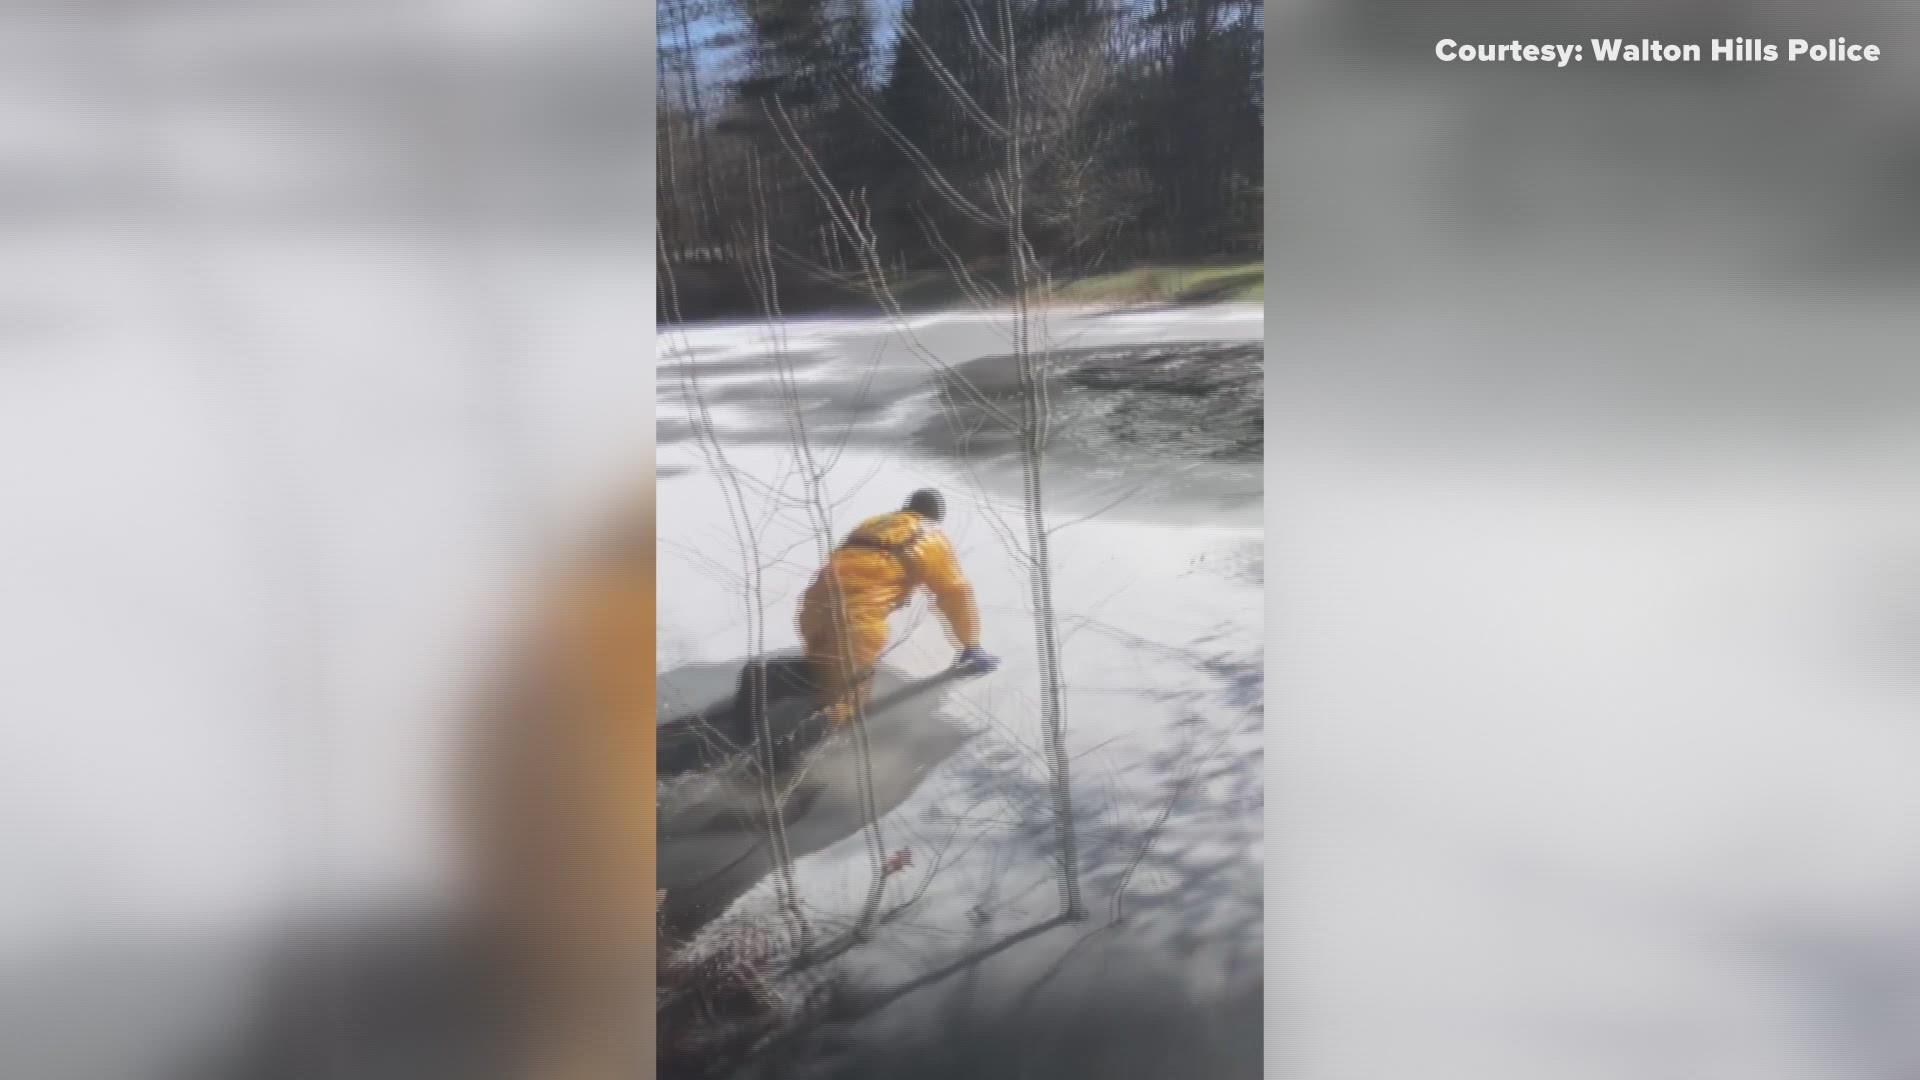 Oakwood Village fire and Walton Hills police saved a dog that fell through an icy pond. The dog was OK, according to authorities.